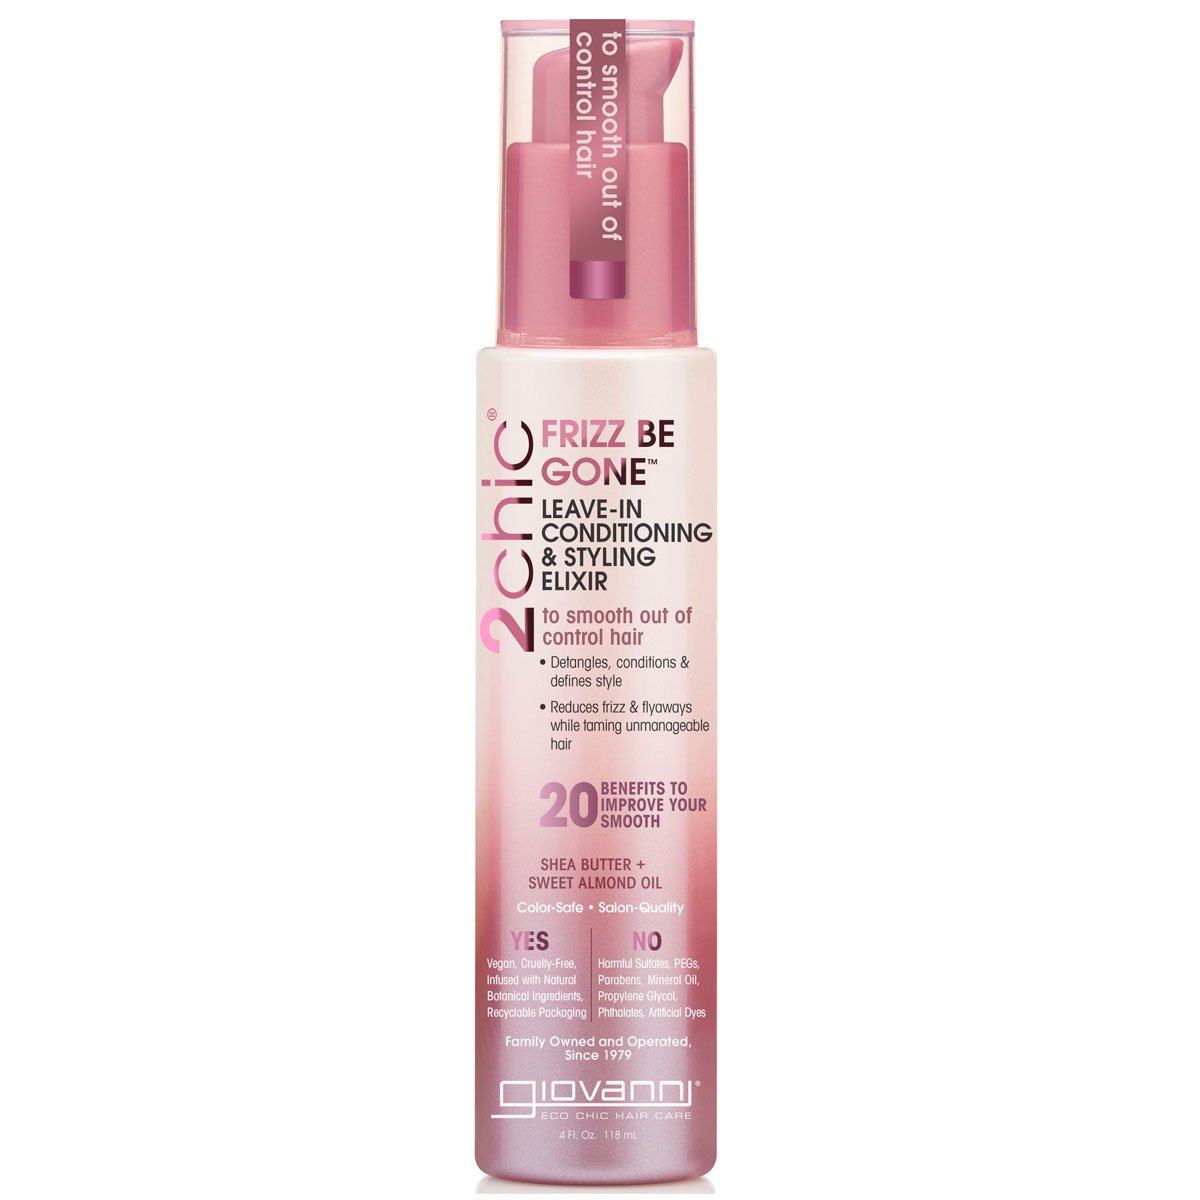 Giovanni 2Chic Frizz Be Gone Leave in Conditioning & Styling Elixir 118ml